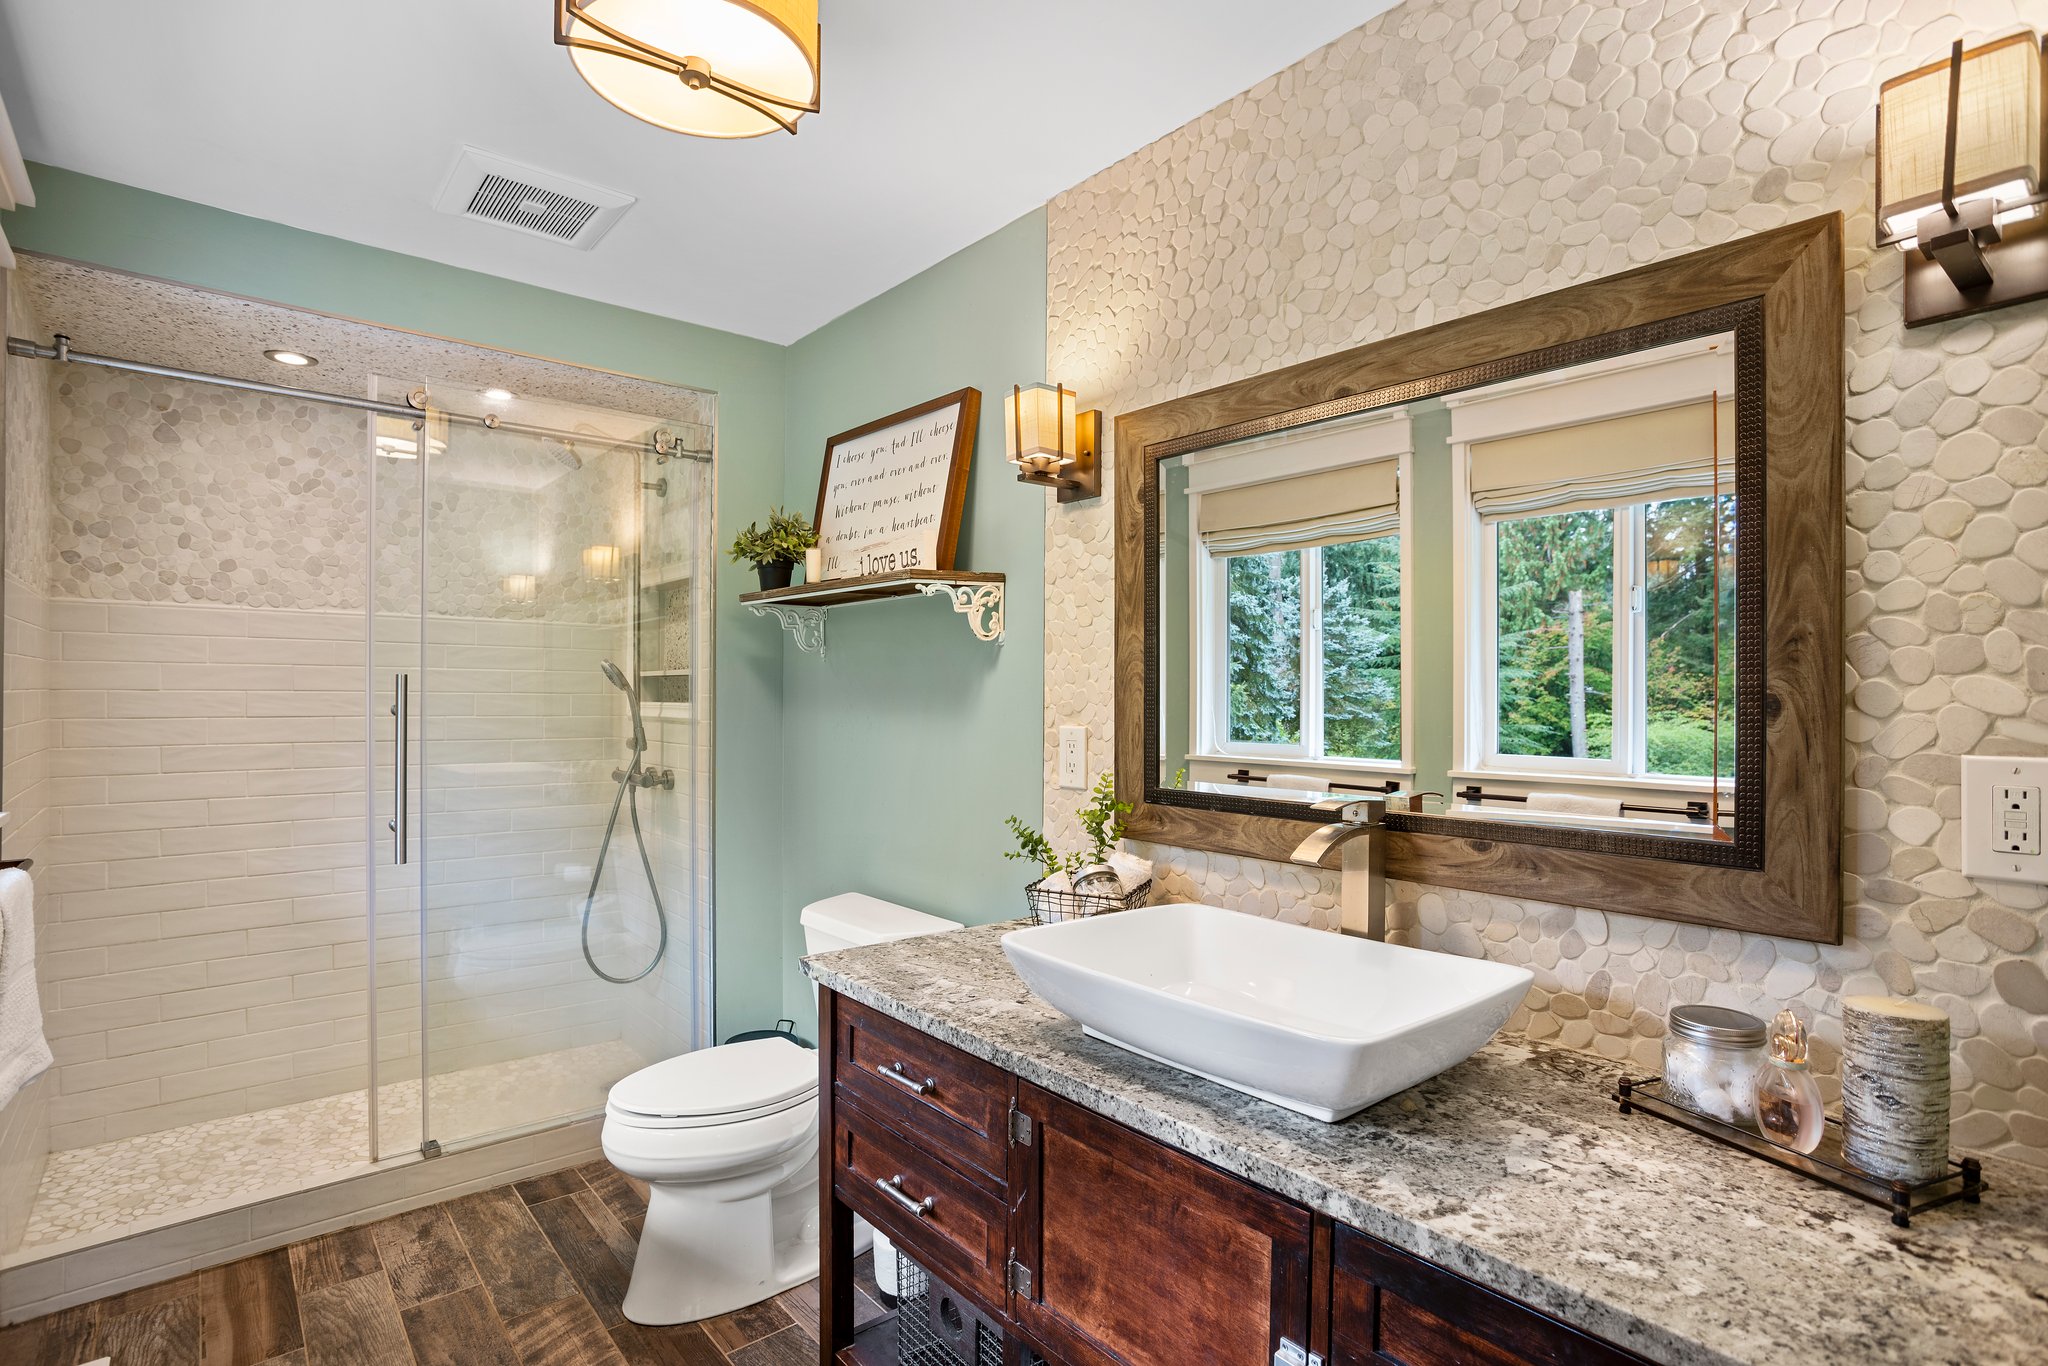 Gorgeous newly remodeled master bath!  Enjoy your personal spa like atmosphere with its custom made vanity and leathered granite countertops. The shower is fully tiled and the floors are new LVP